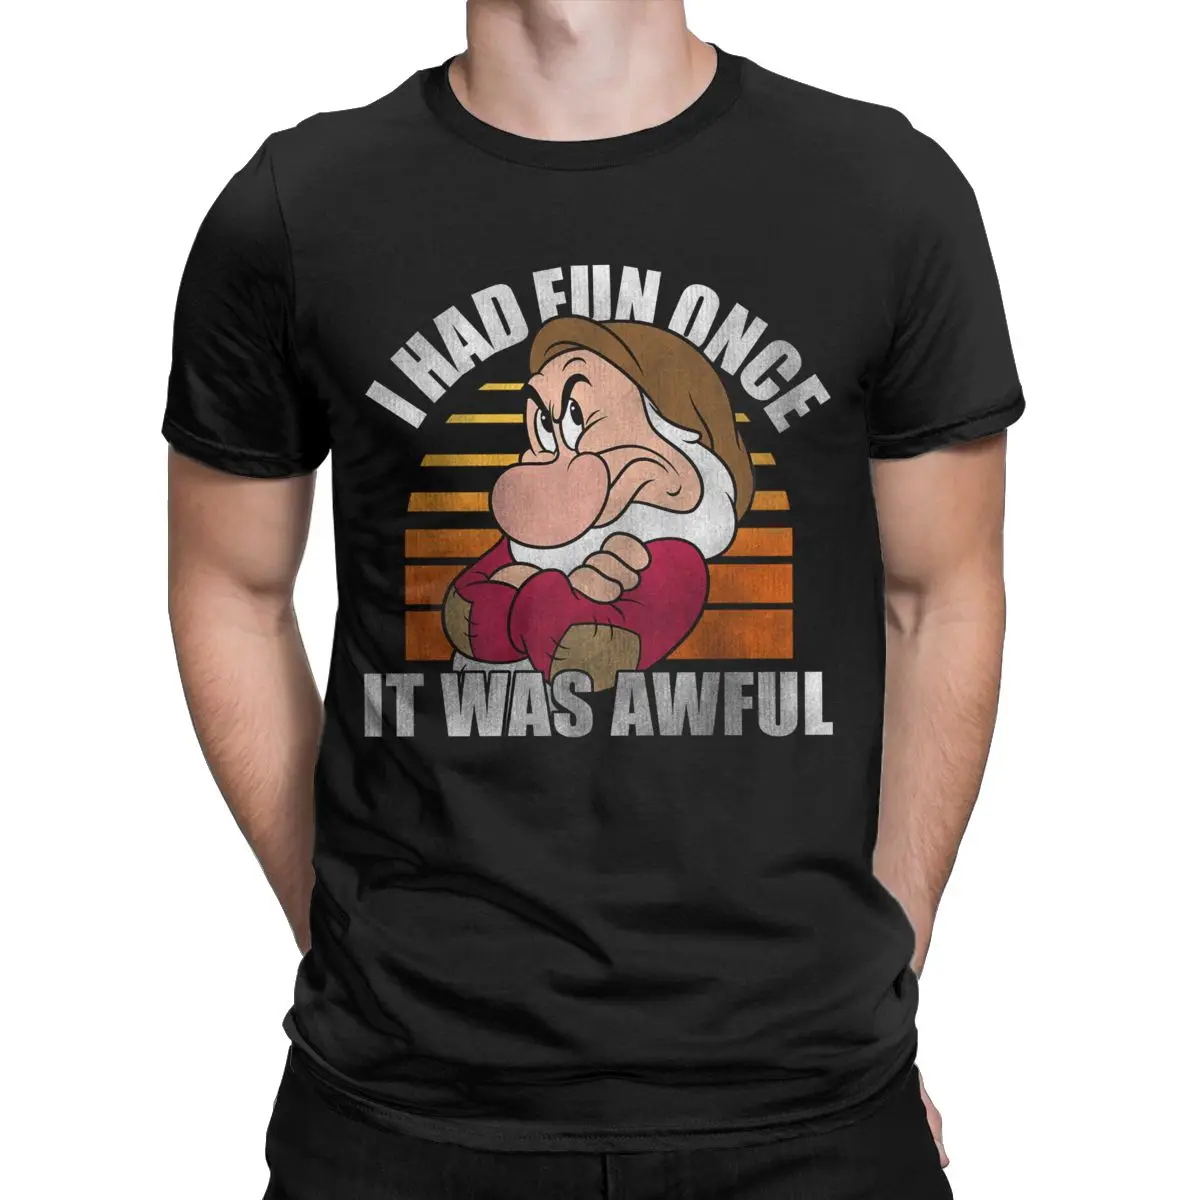 I Had Fun Once It Was Awful Disney Seven Dwarfs Grumpy Men T Shirts Novelty Tees O Neck T-Shirt Pure Cotton Summer Clothes